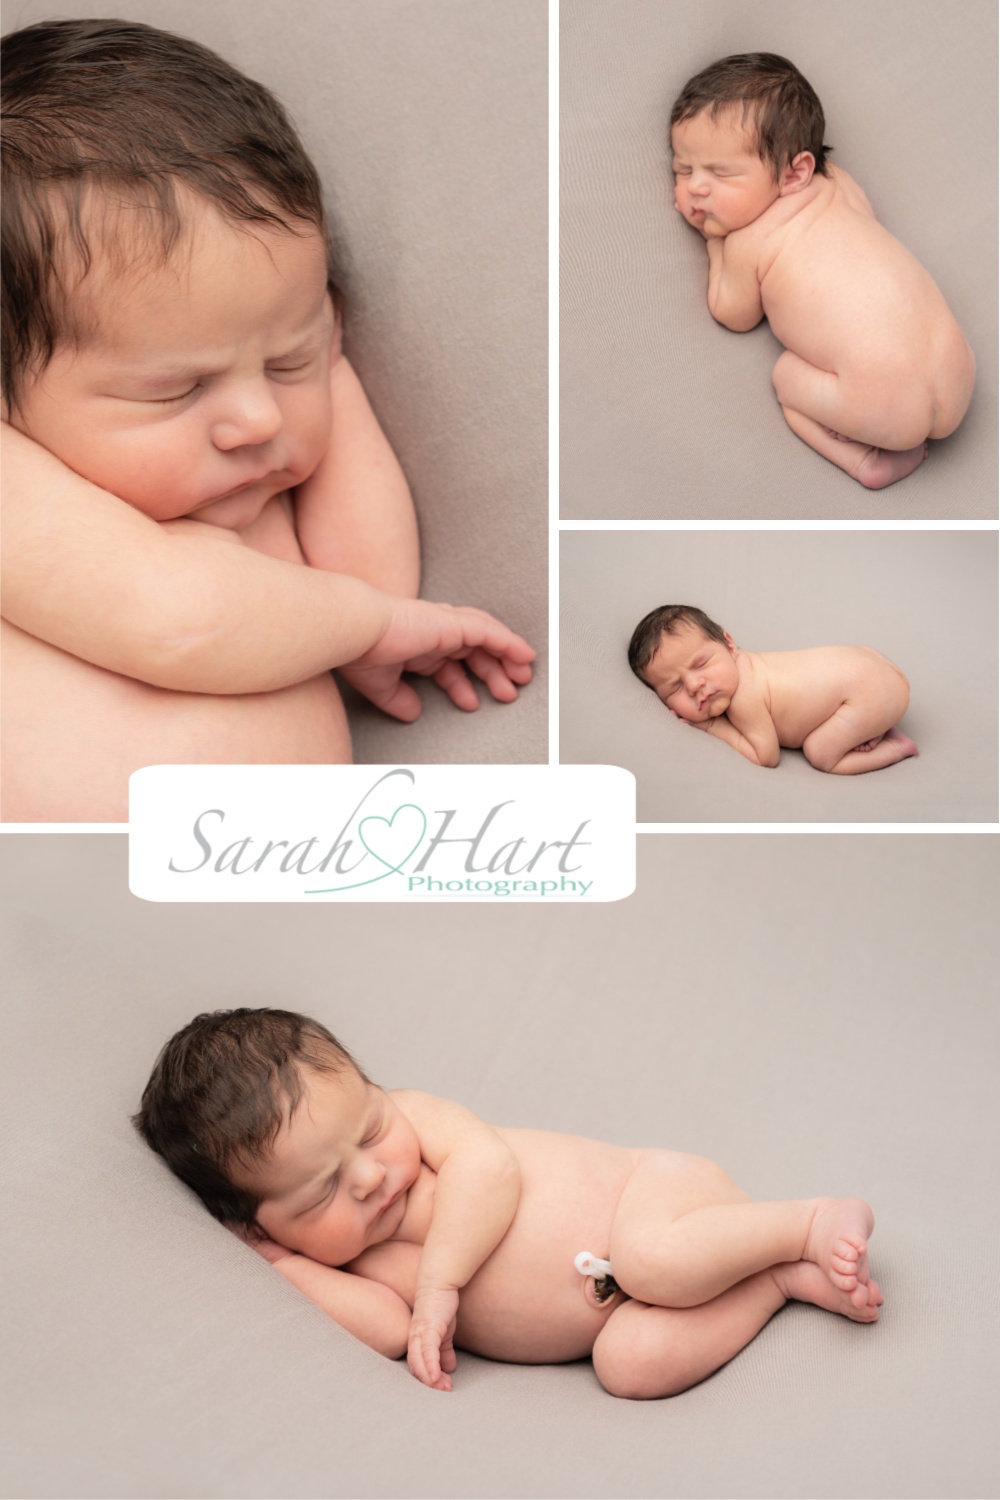 Top 5 Baby Poses For Your Next Newborn Photo Session! - Melissa DeVoe  Photography